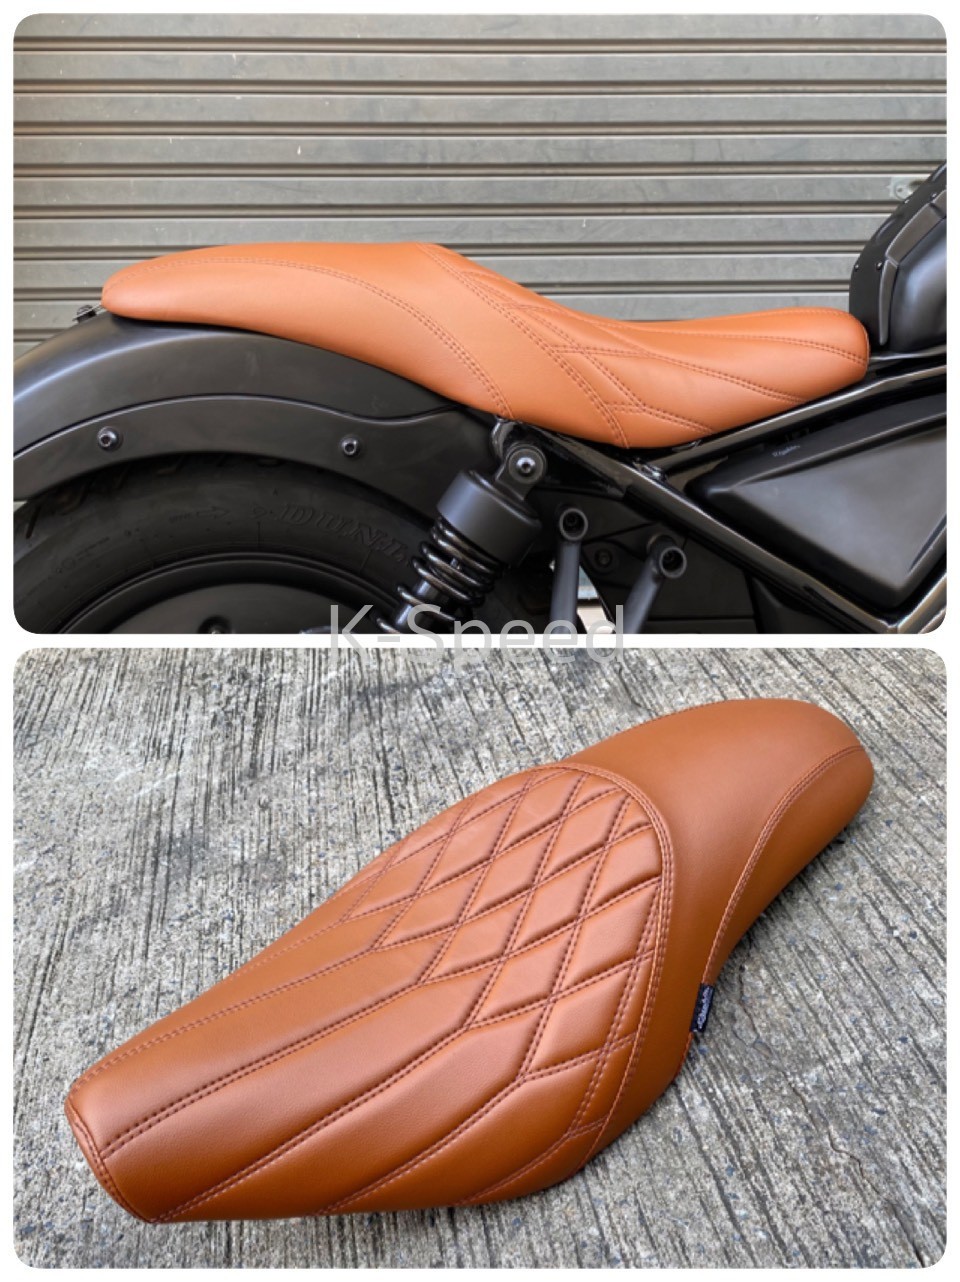 Diablo seat cushions Long version with mixed styles Brown Color For Rebel300 & 500